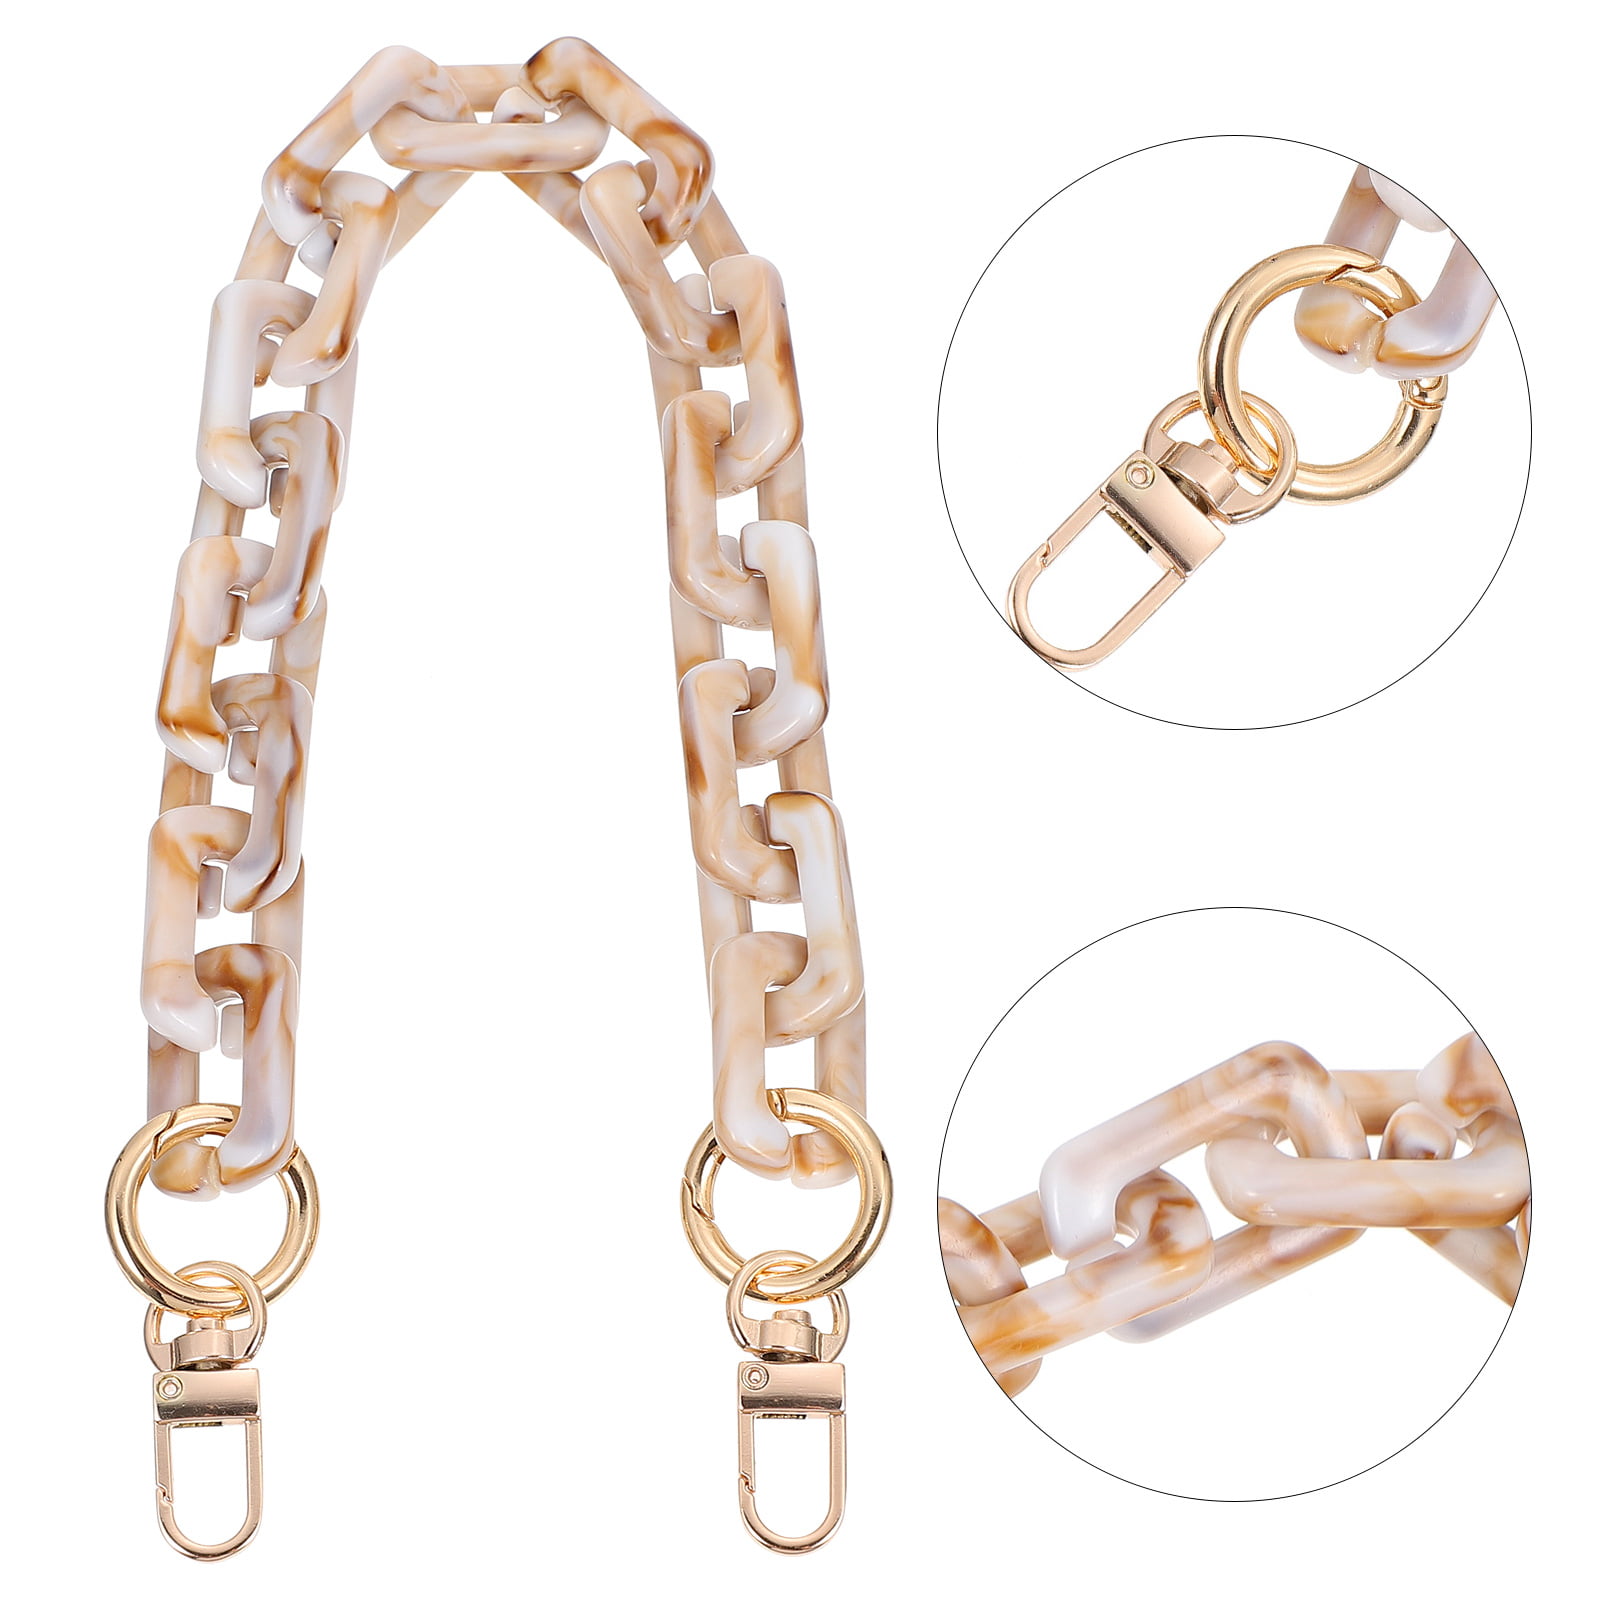 Metal Chain Strap For Bags Diy Handles Crossbody Accessories For Handbag  Luxury Brand Detachable Replacement Purse Chain Strap - Bag Parts &  Accessories - AliExpress